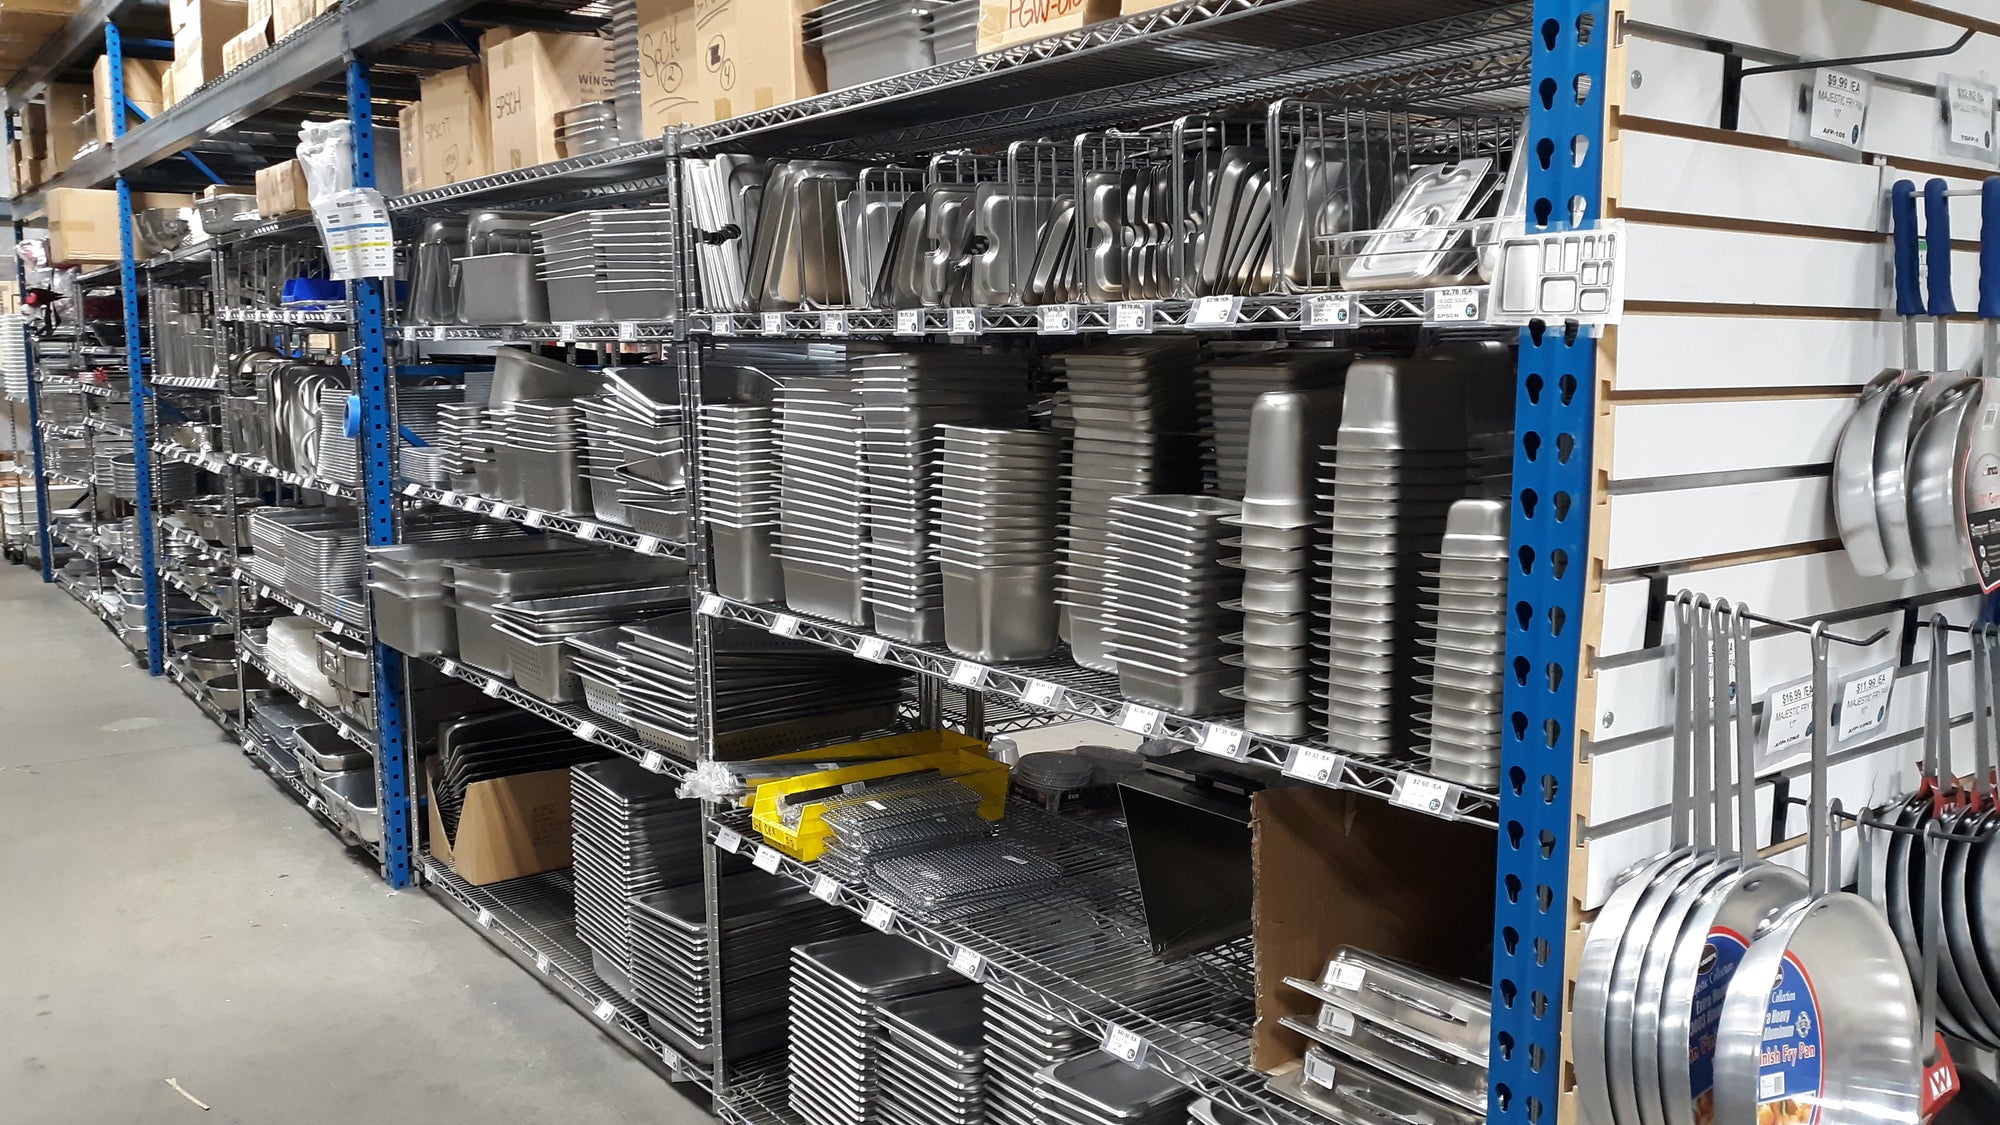 Make prep work easy!  All of the storage containers you need to organize your commercial kitchen!